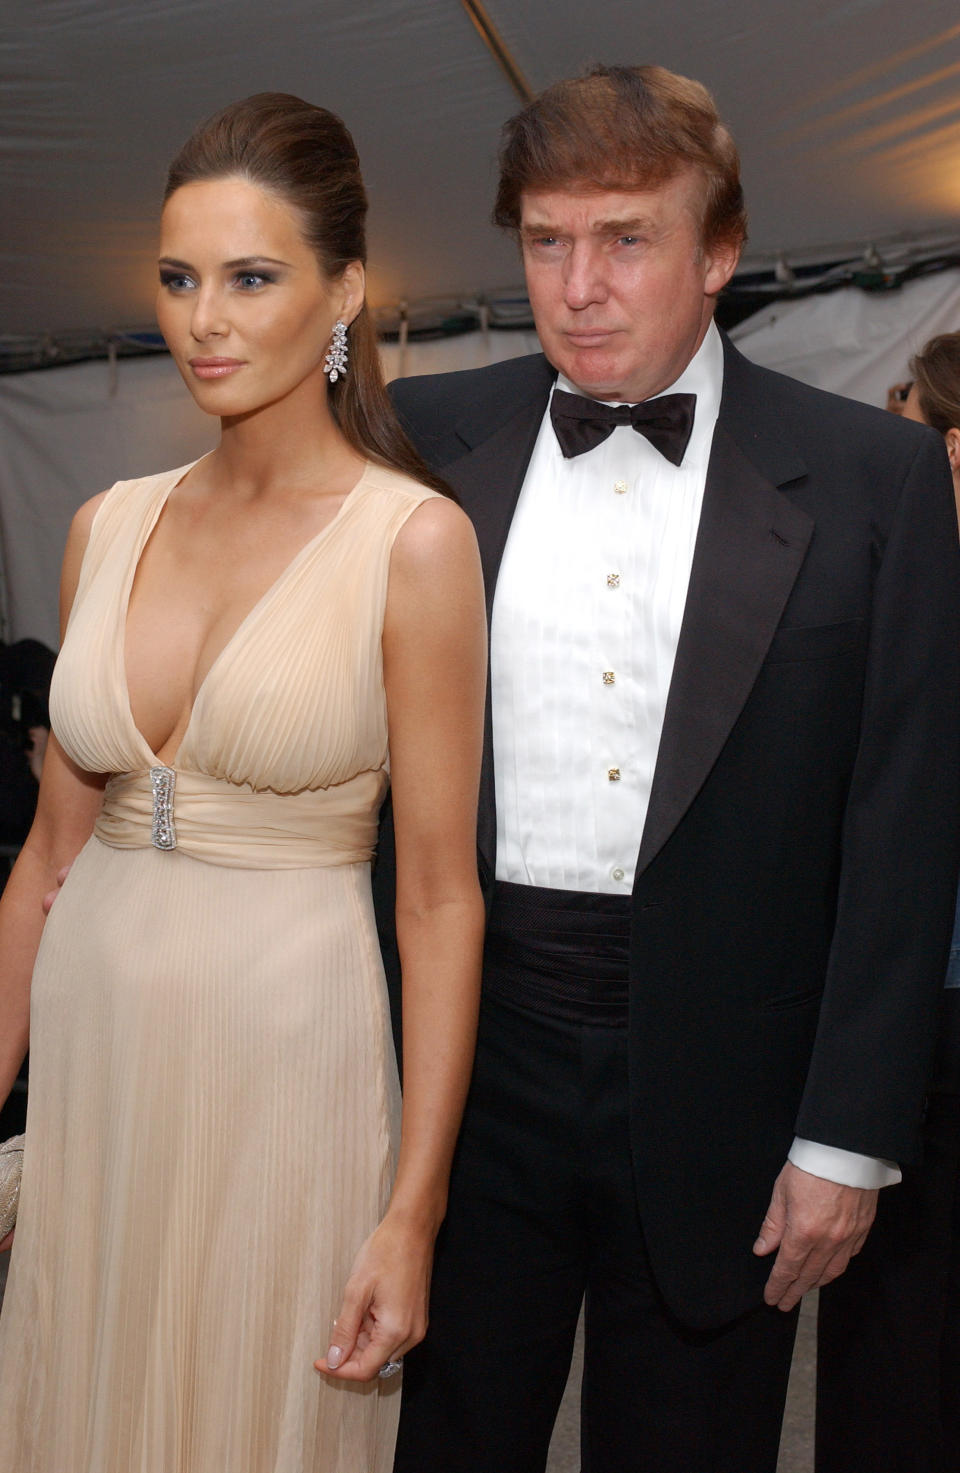 Pictured with Melania Trump.